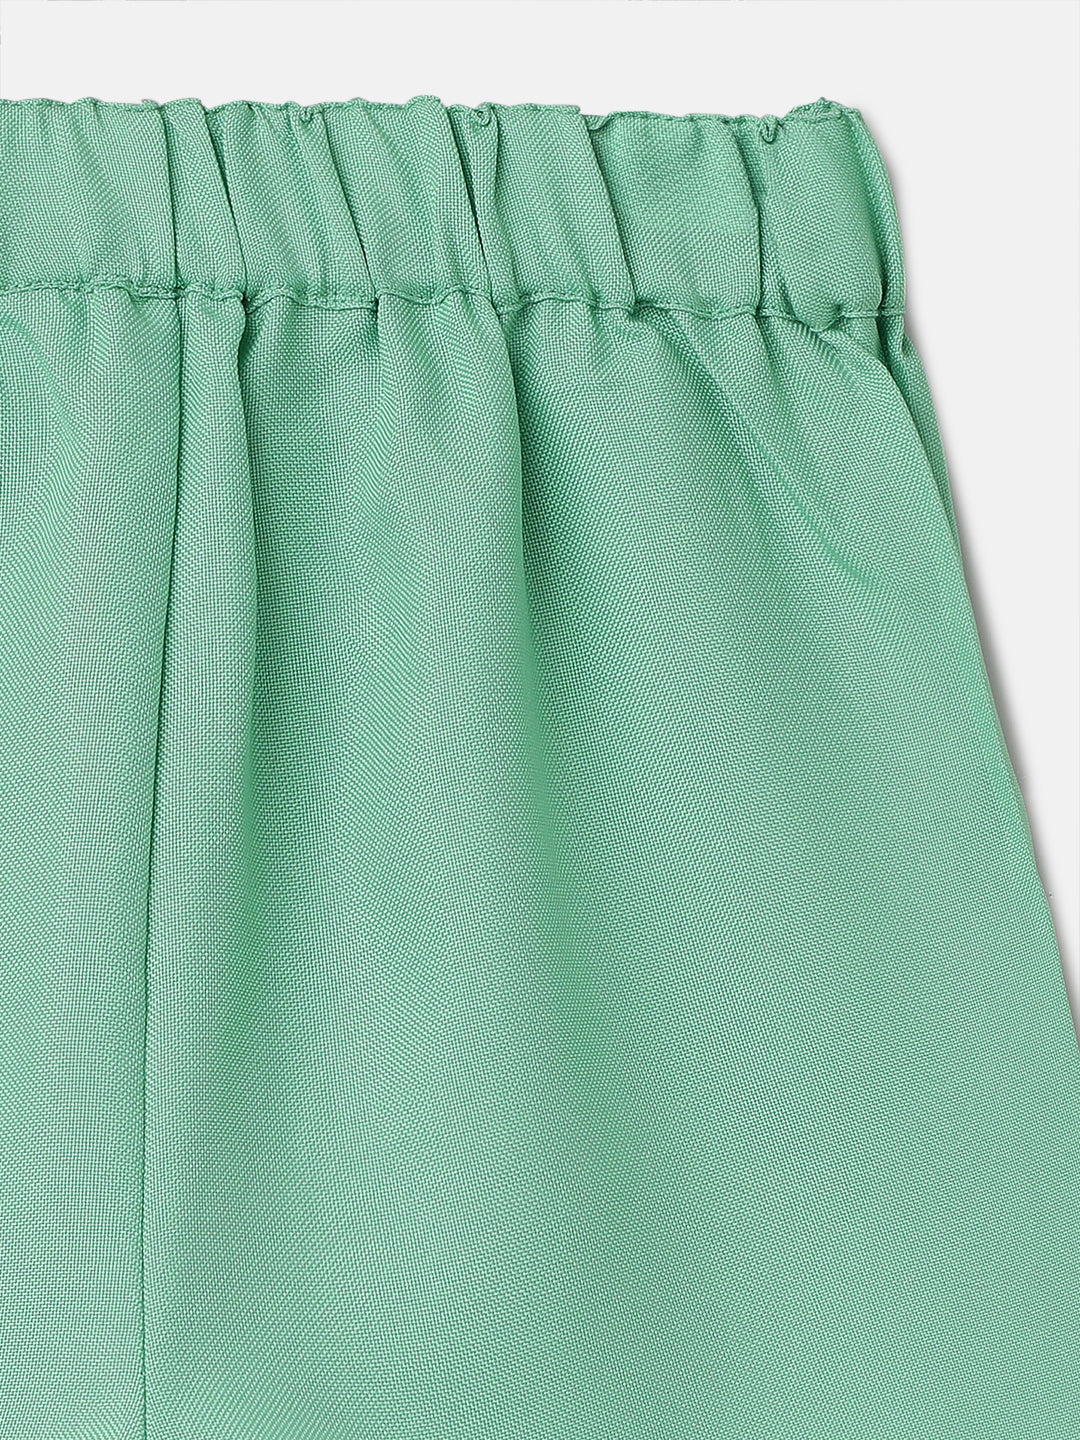 Girls Self Textured Solid Green Shorts